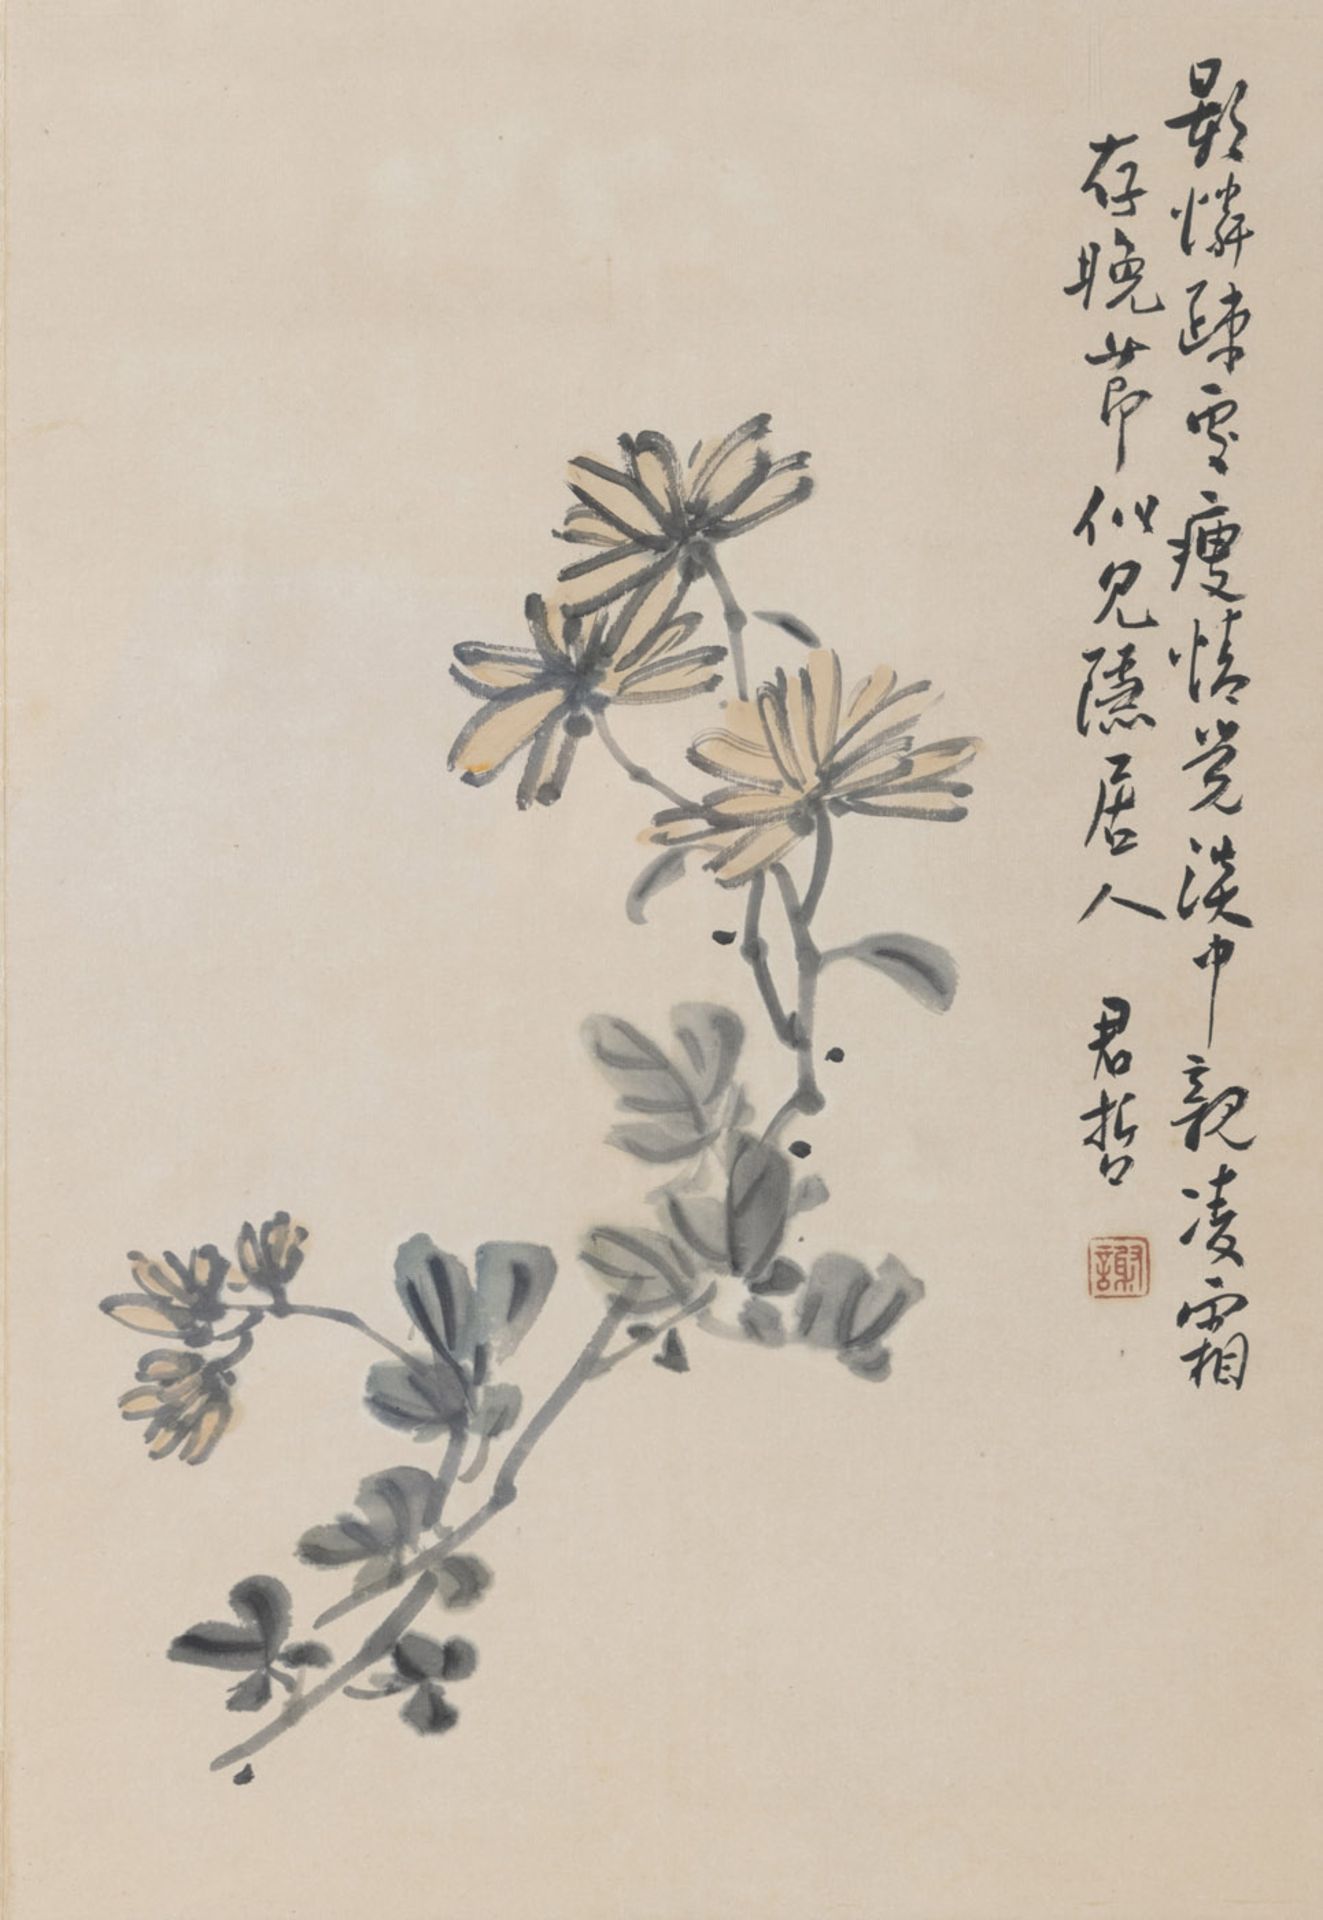 TWO PRINTS: FLOWERS WITH CALLIGRAPHY AND GRAZING HORSE